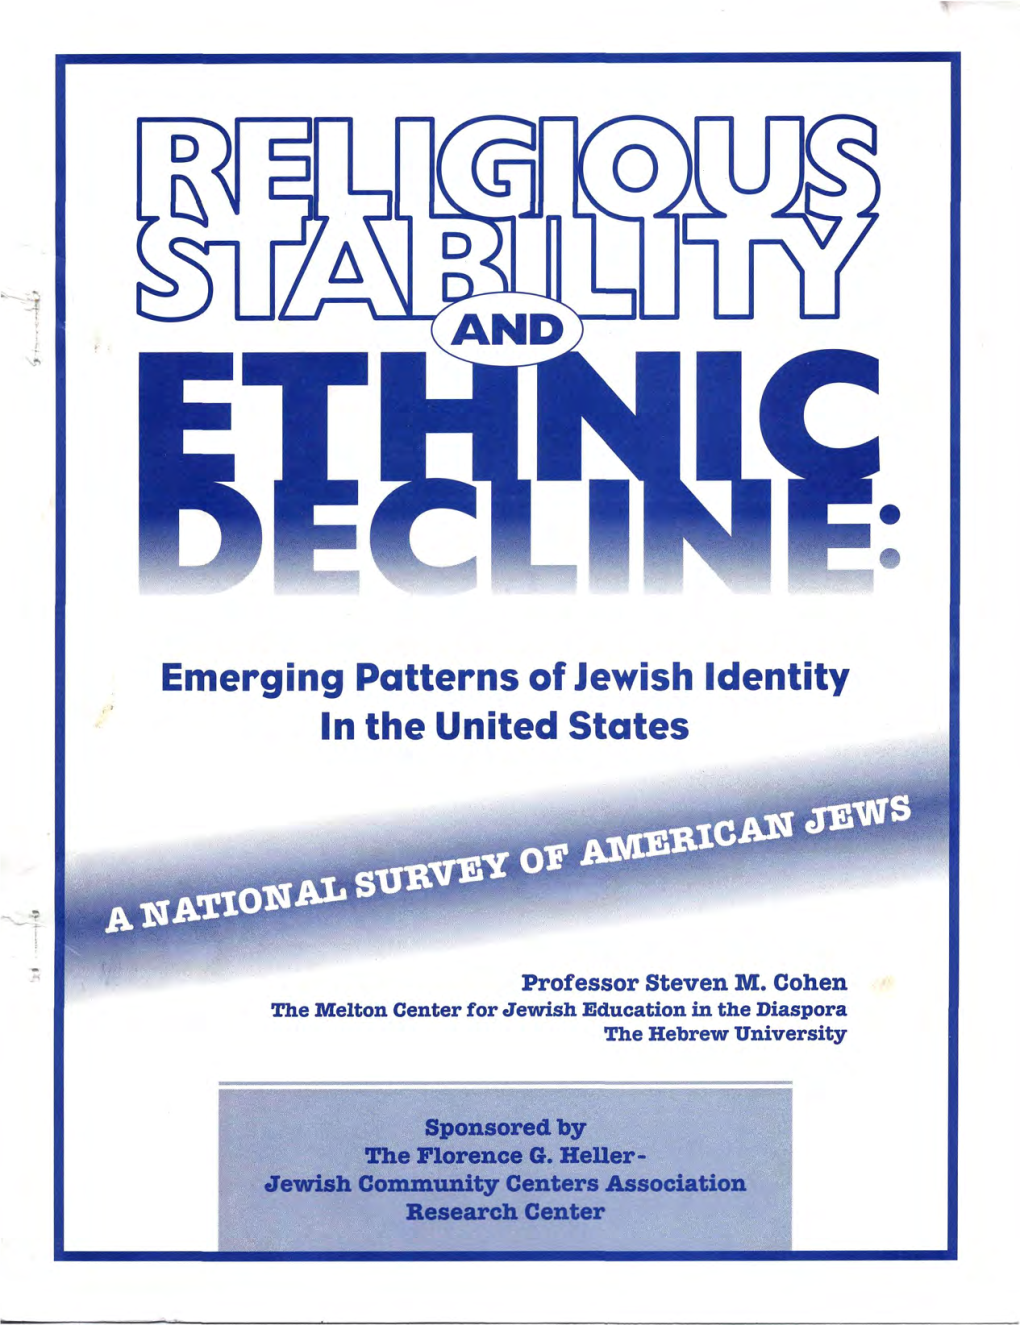 Emerging Patterns of Jewish Identity in the United States